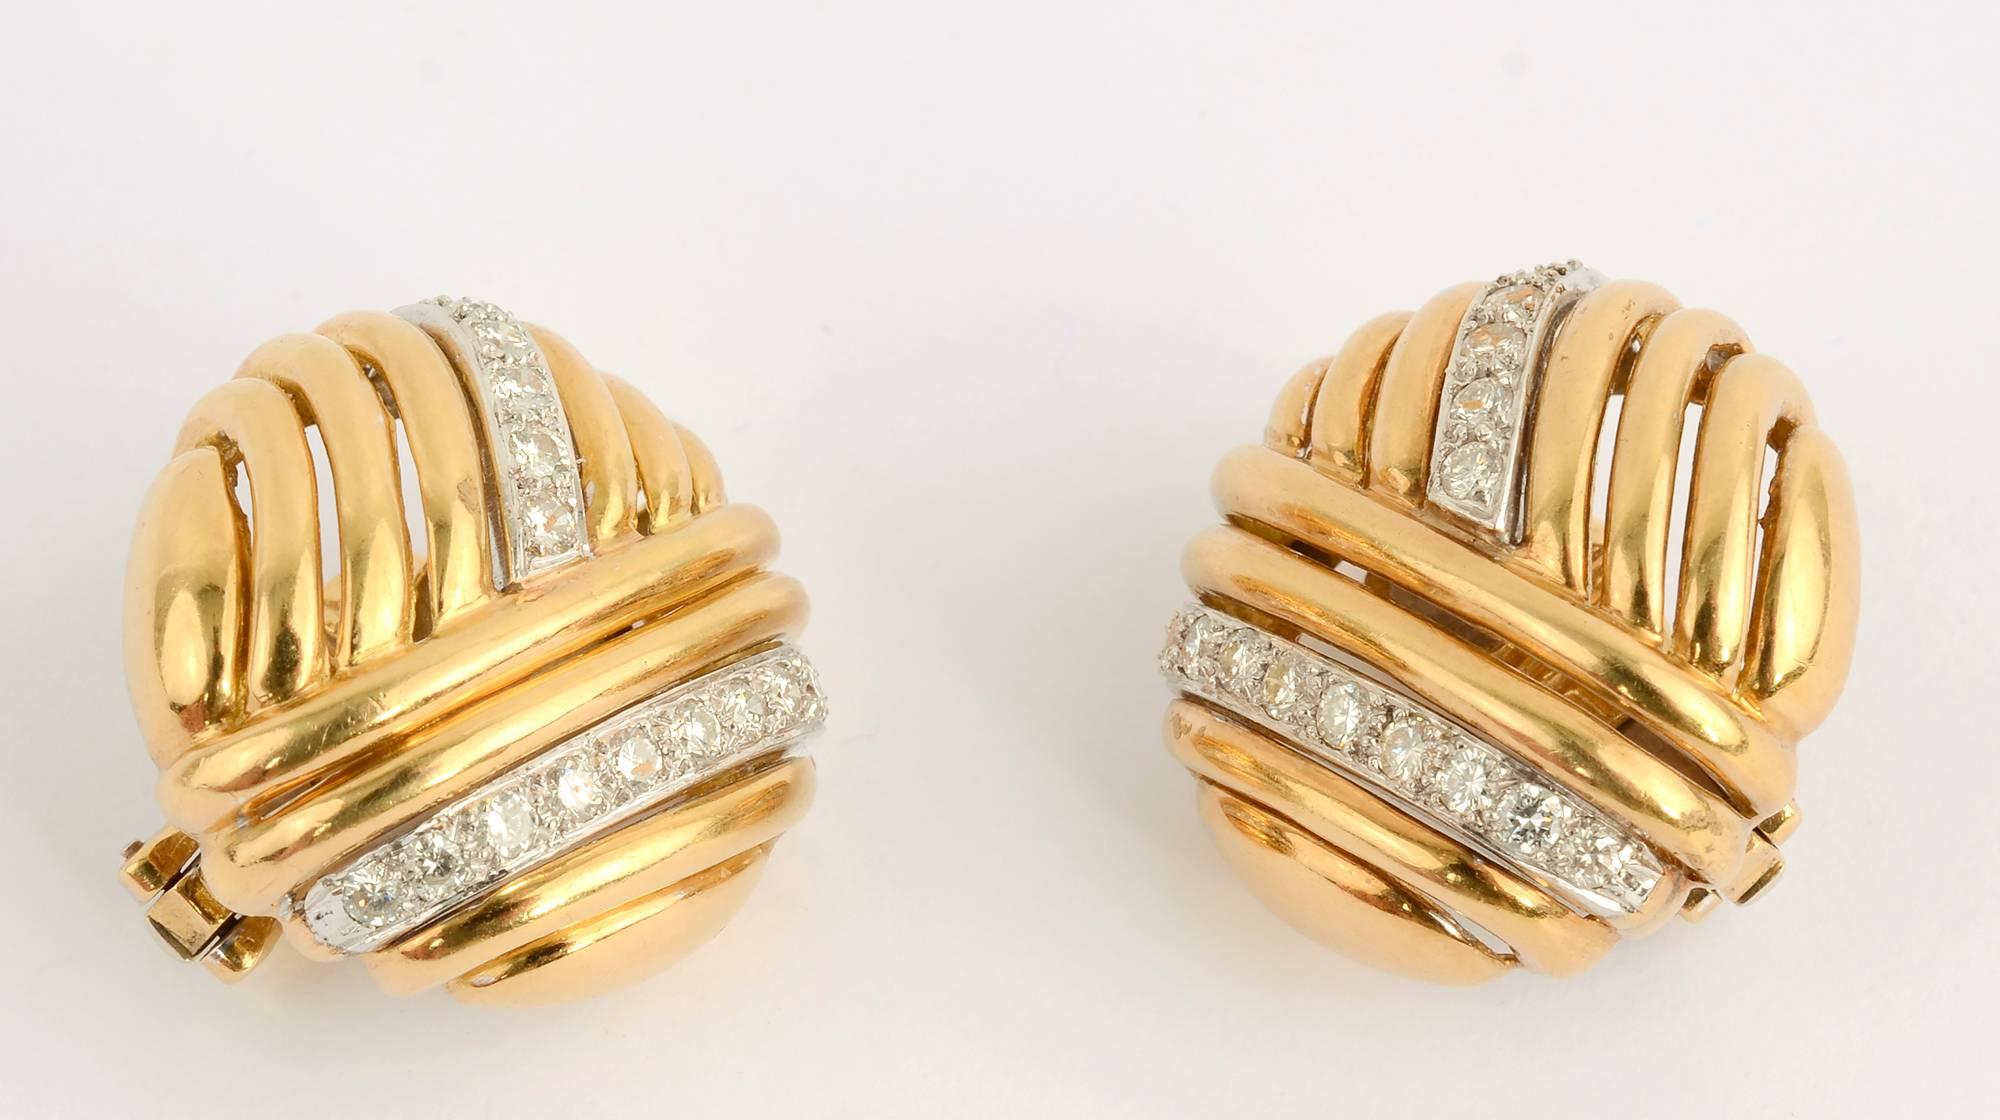 Stylish design of striated gold bands going in three directions highlighted by two rows of diamonds. The earrings are slightly domed. 
The backs are clips that can be converted to posts. Measurements are 15/16 